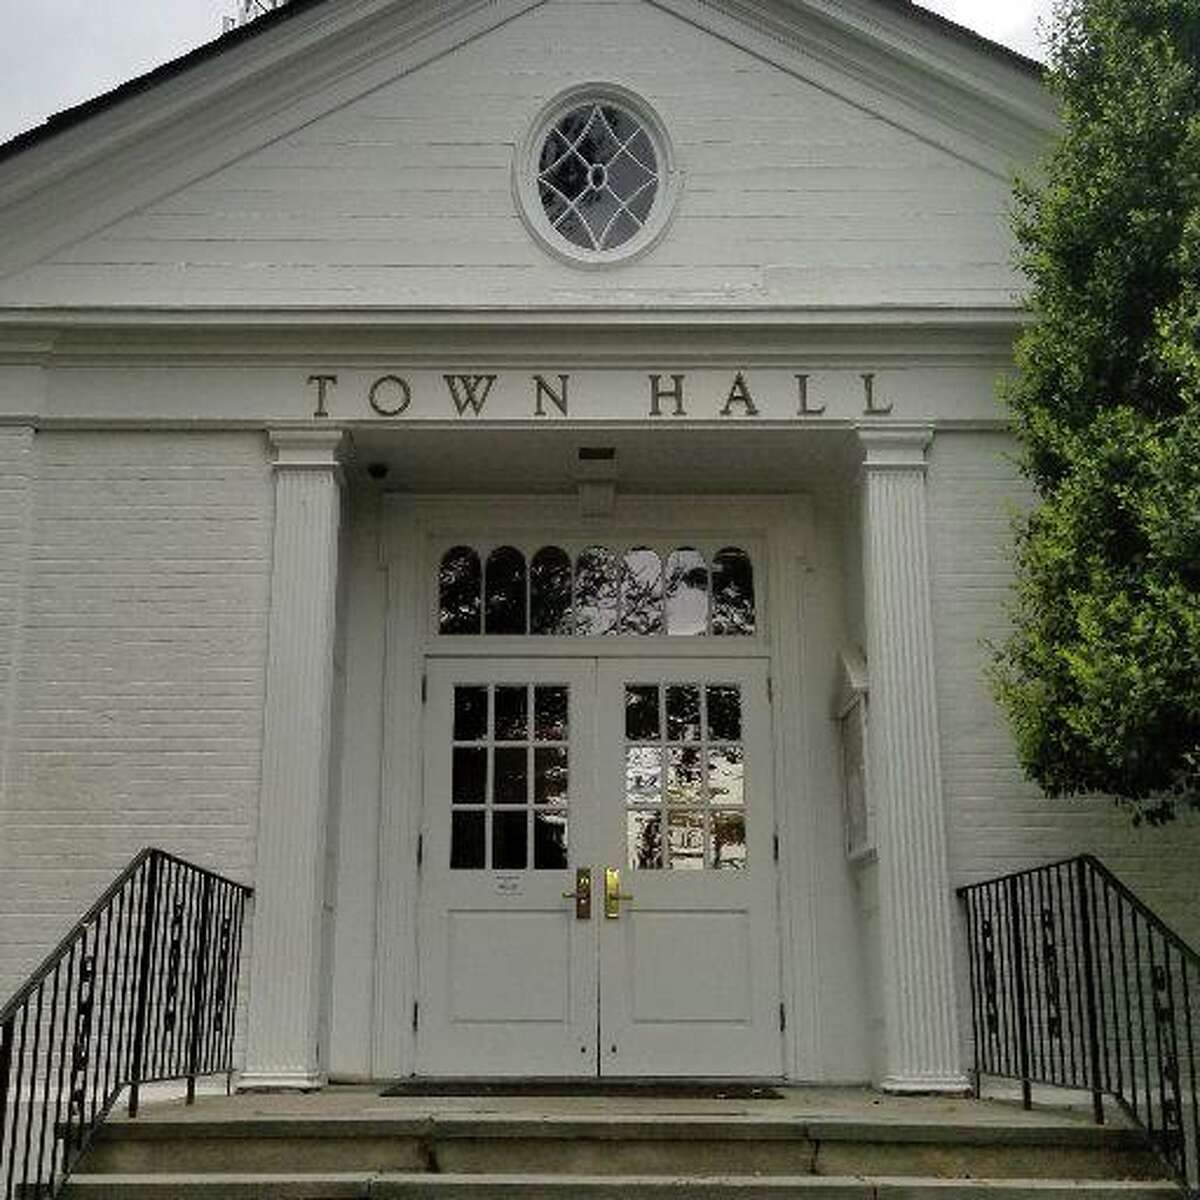 Weston Town Hall at 56 Norfield Road in Weston.